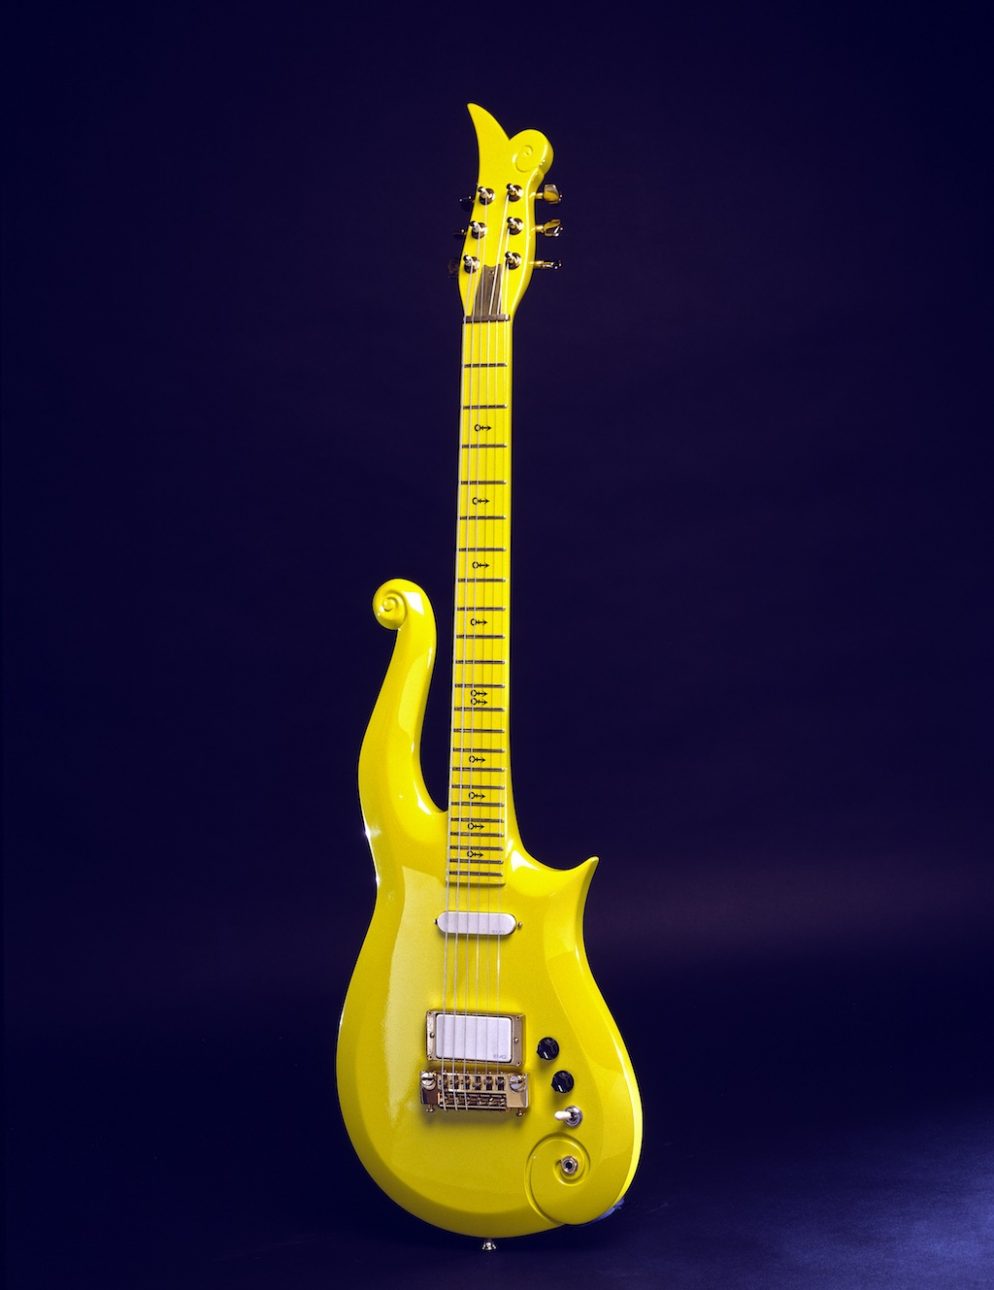 This Prince Guitar Is Now On Display At The National Museum Of American History Washingtonian